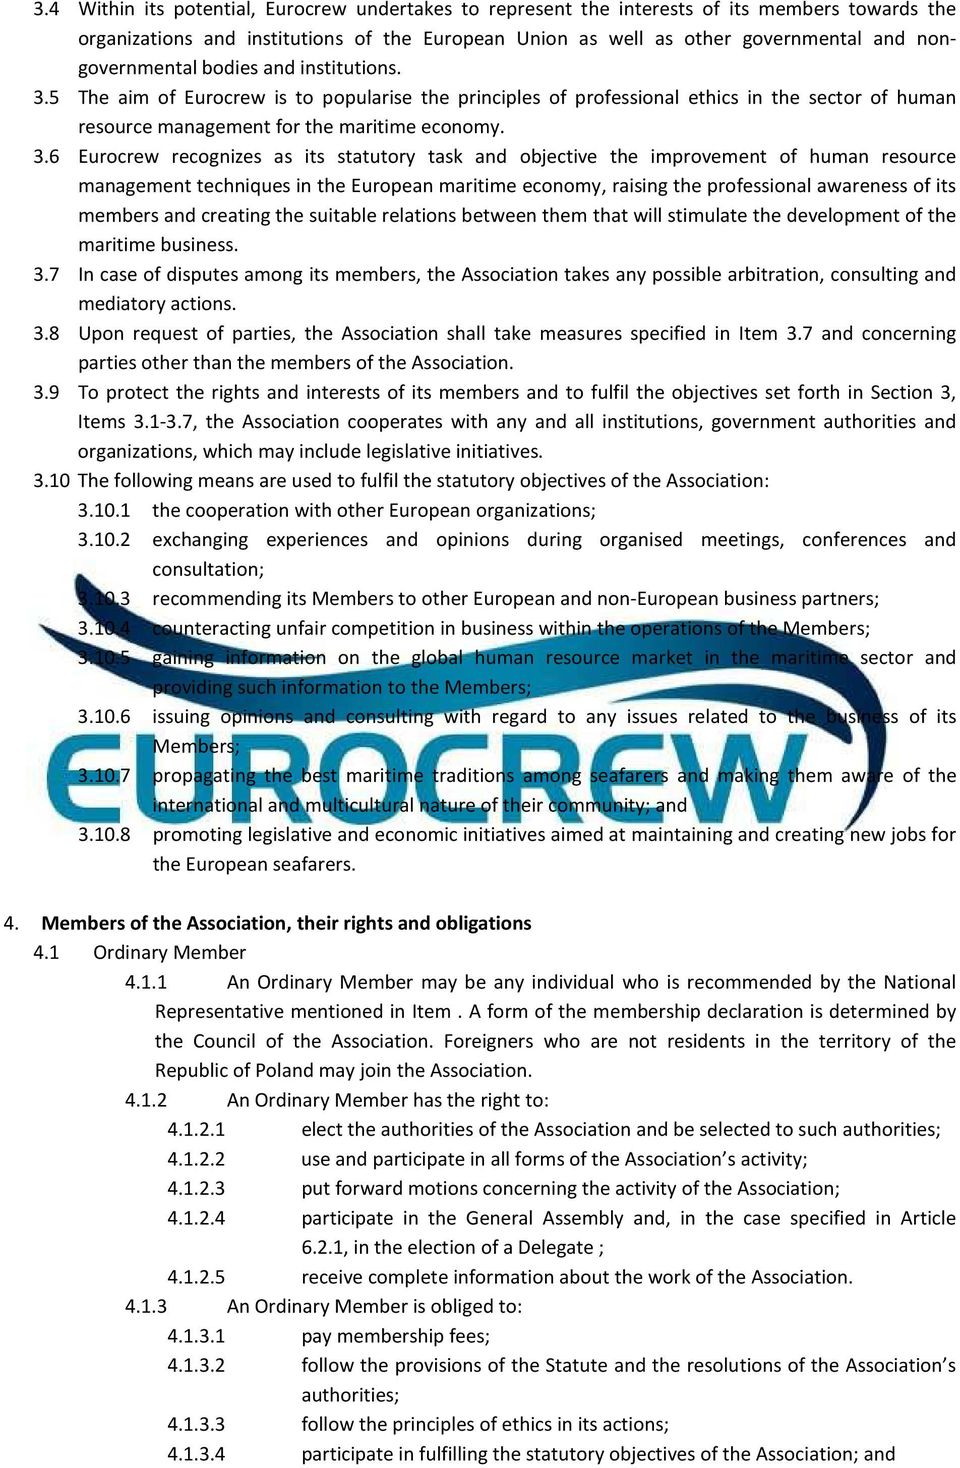 5 The aim of Eurocrew is to popularise the principles of professional ethics in the sector of human resource management for the maritime economy. 3.